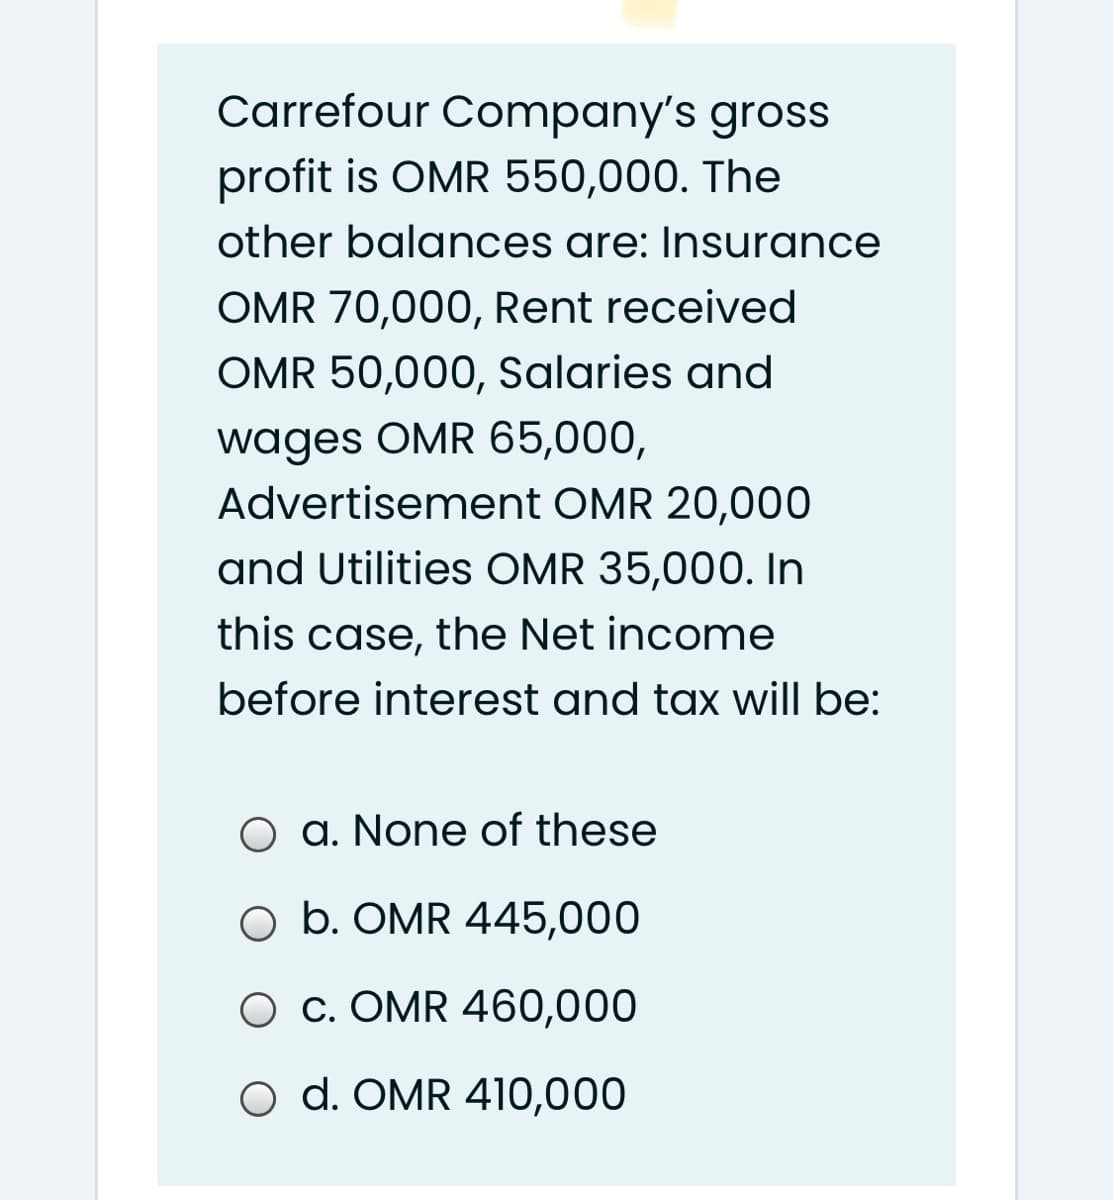 Carrefour Company's gross
profit is OMR 550,000. The
other balances are: Insurance
OMR 70,000, Rent received
OMR 50,000, Salaries and
wages OMR 65,000,
Advertisement OMR 20,000
and Utilities OMR 35,000. In
this case, the Net income
before interest and tax will be:
O a. None of these
O b. OMR 445,000
O c. OMR 460,000
O d. OMR 410,000
